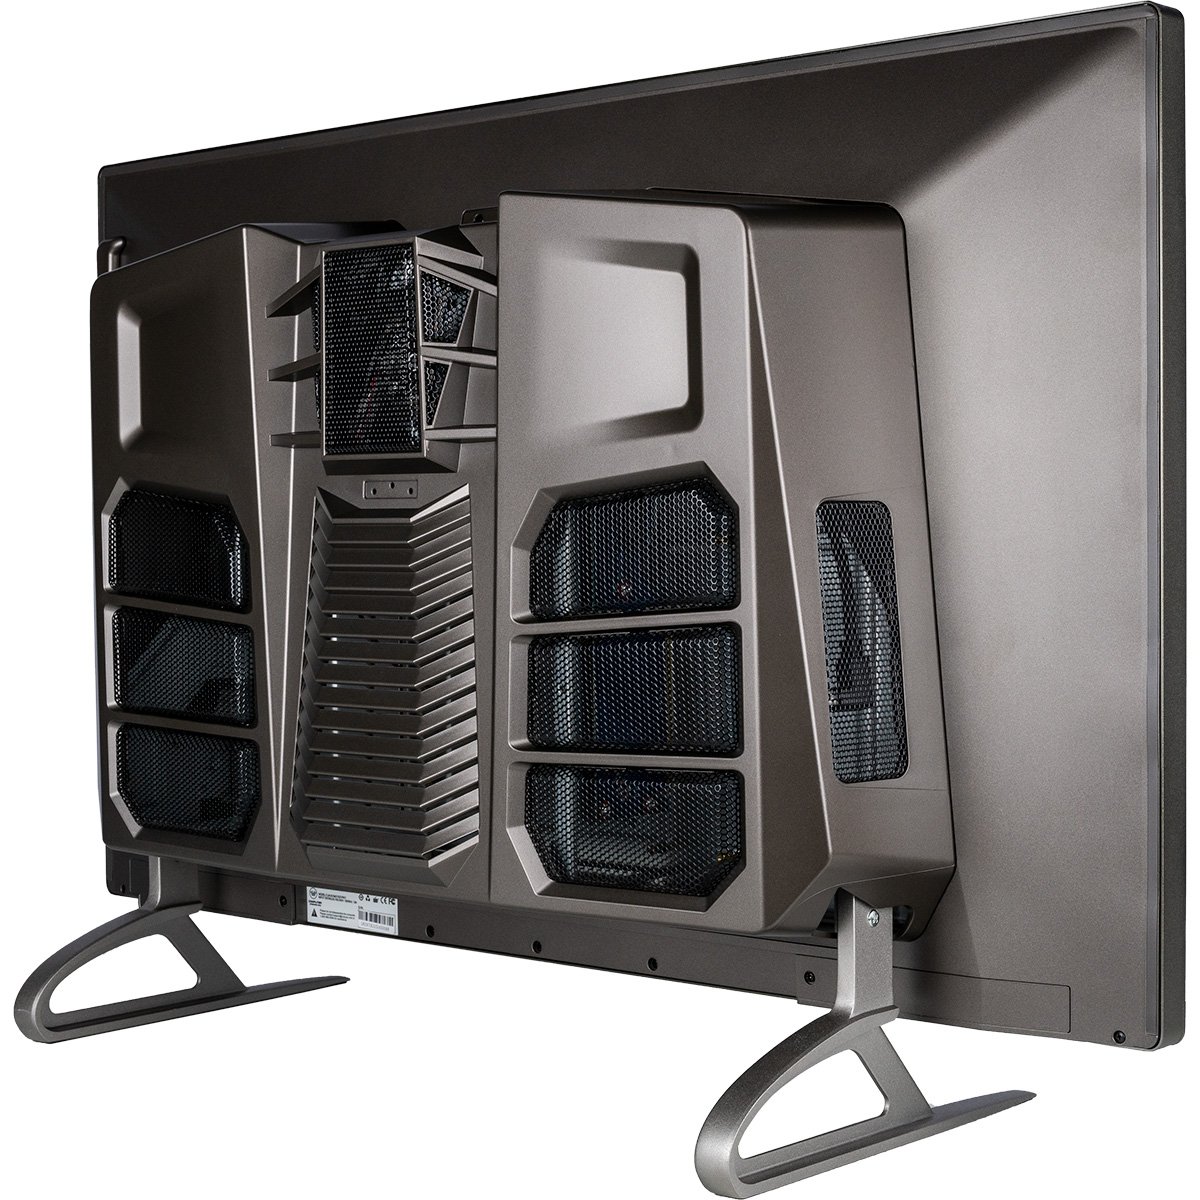 Perfect Display G32 All-in-One Barebones PC New with Blemished Display 31.5 inch QHD 144Hz Desktop Computer Kit (Refurb)